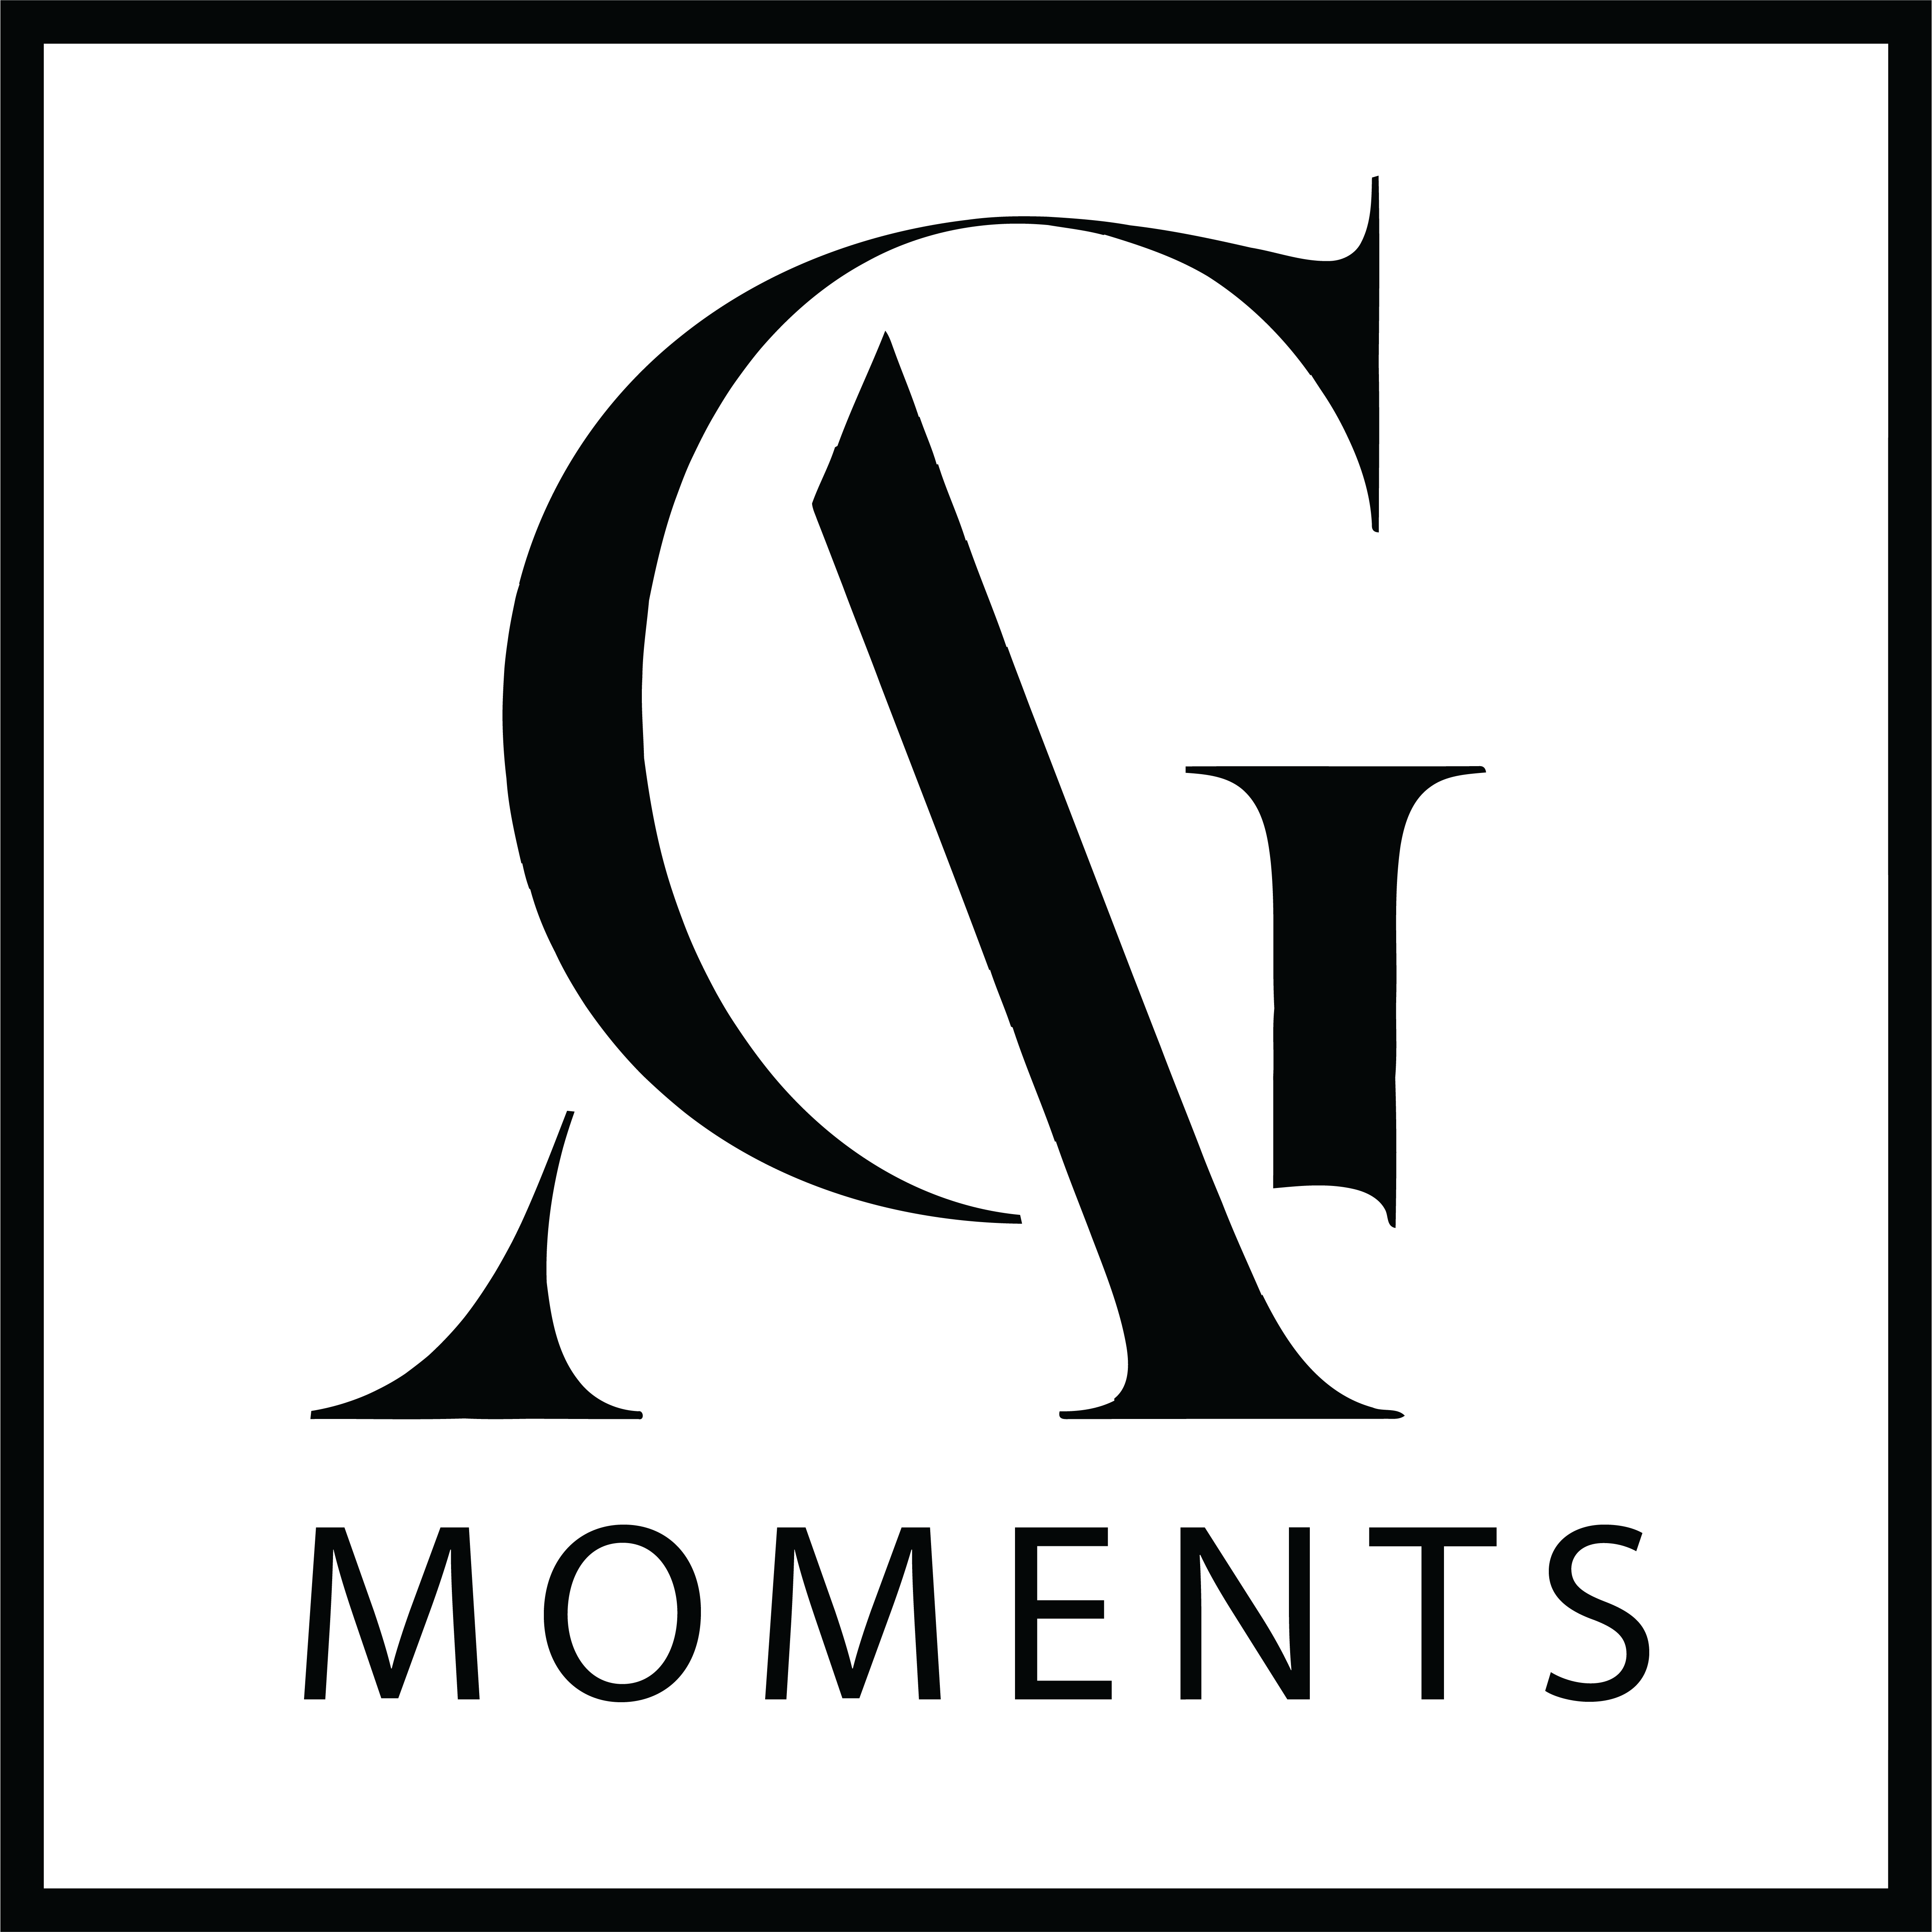 AG Moments Photography - Expert in Family, Event, and Product Imagery